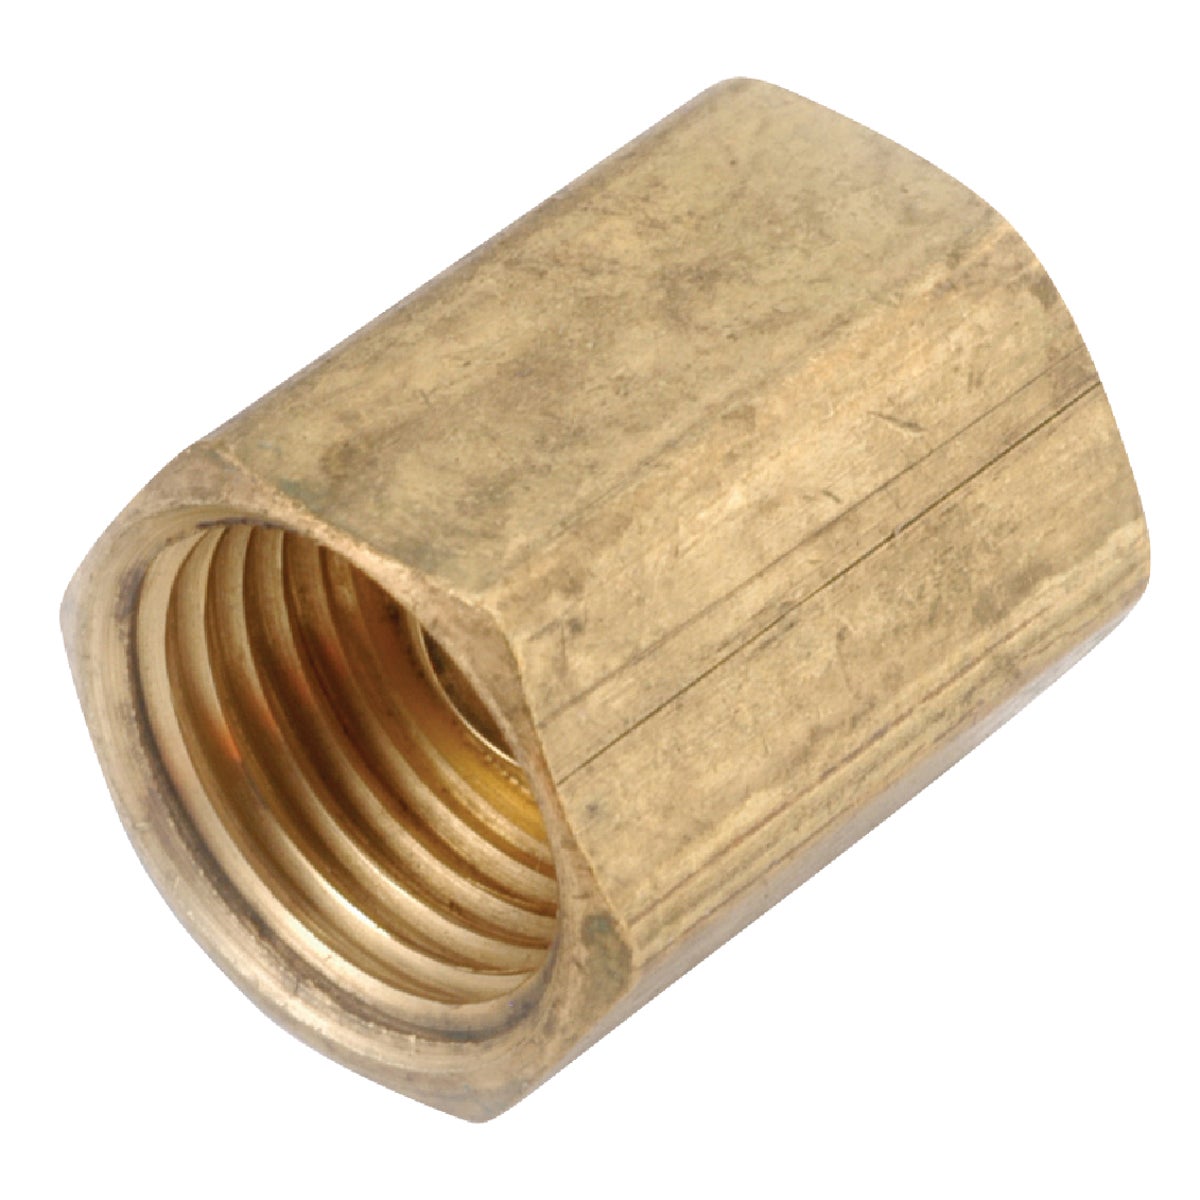 Anderson Metals 54342-04 Anderson Metals 1/4 In. Brass Inverted Flare Union 54342-04 Pack of 5